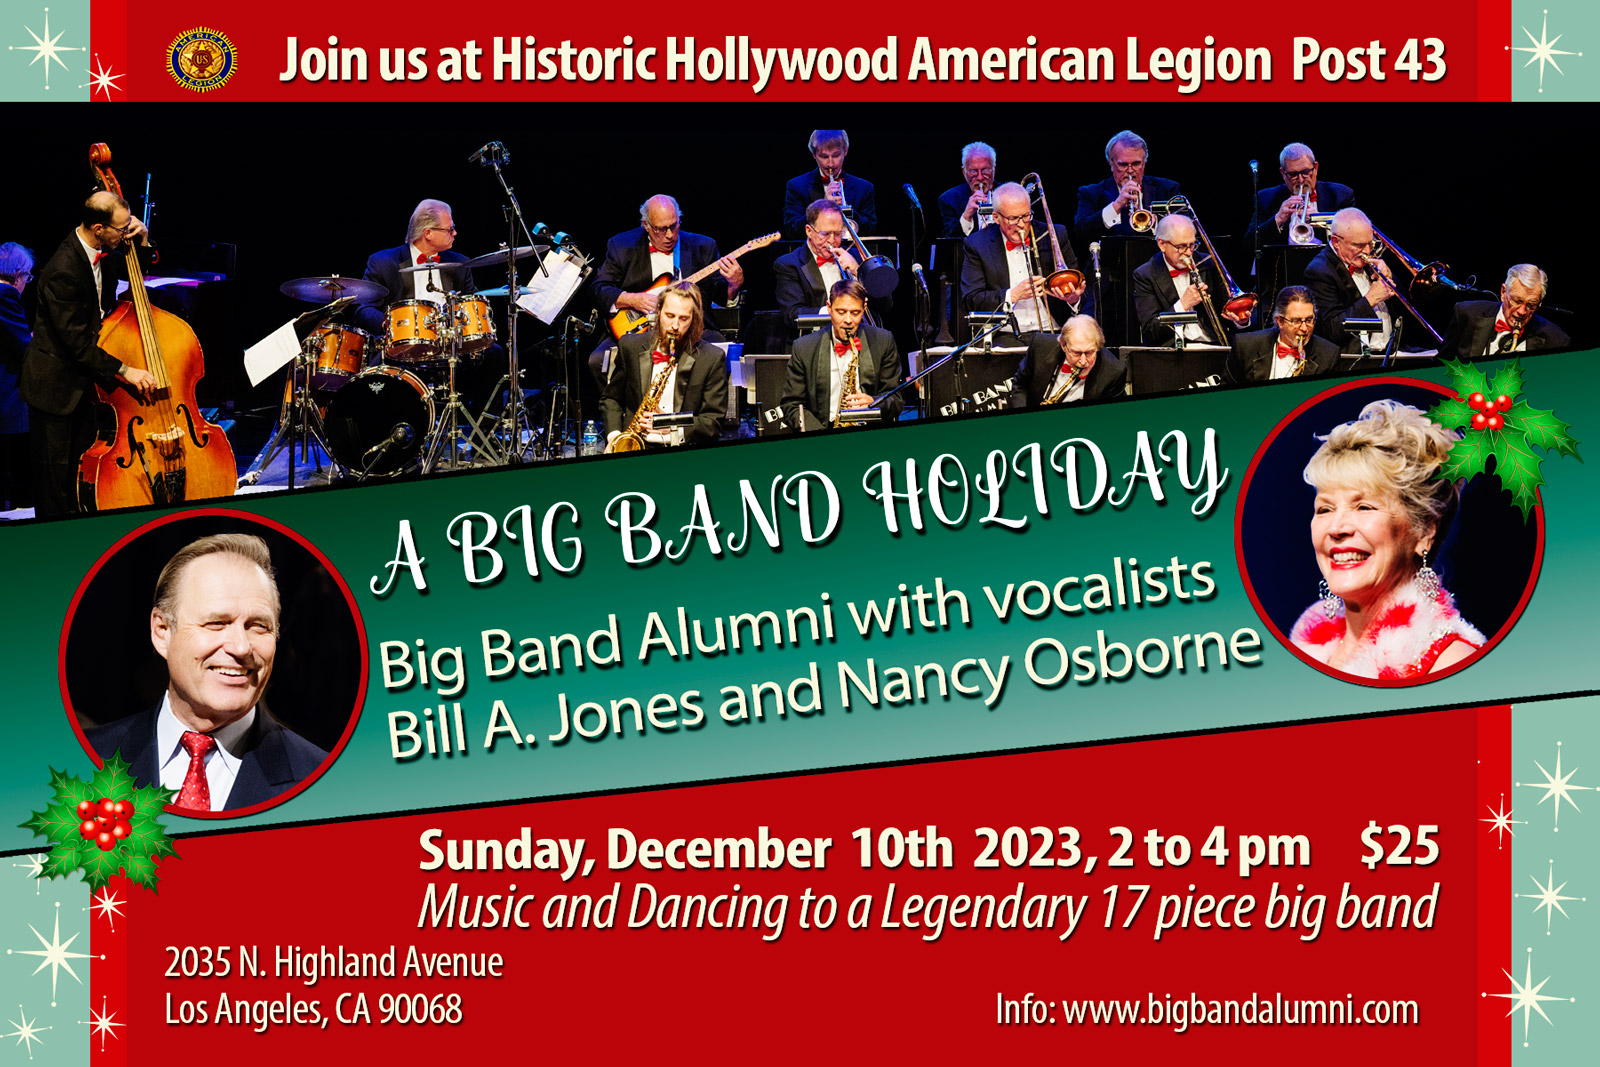 A Big Band Holiday Music and Dance at the Historic American Legion Hollywood Post 43